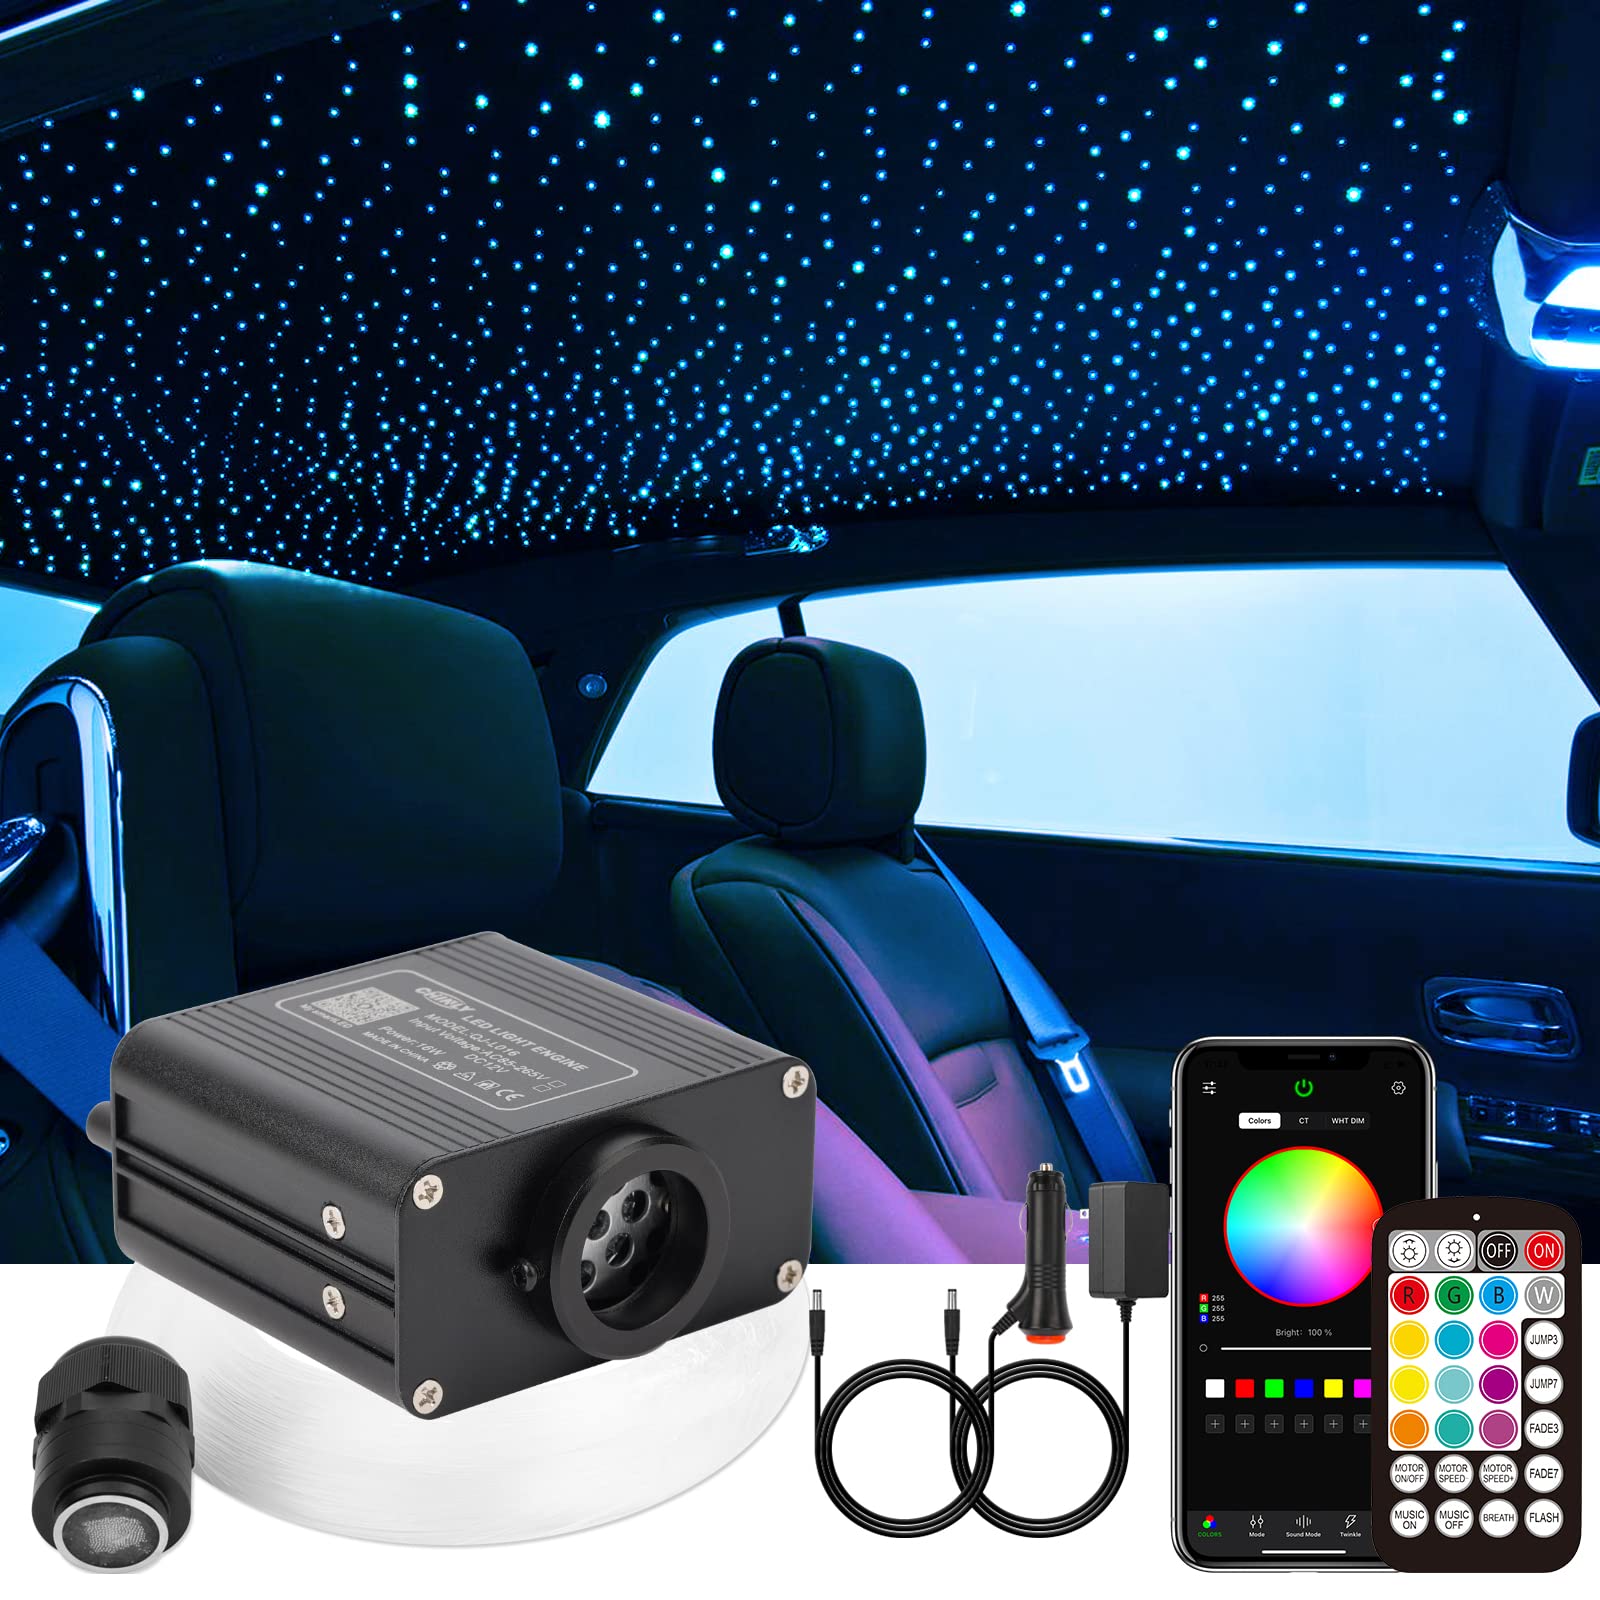 CHINLY Twinkle 400pcs 9.8ft (0.03in+0.04in+0.06in) Fiber Optic Lights Starlight Headliner kit, Music Mode Bluetooth APP Control 